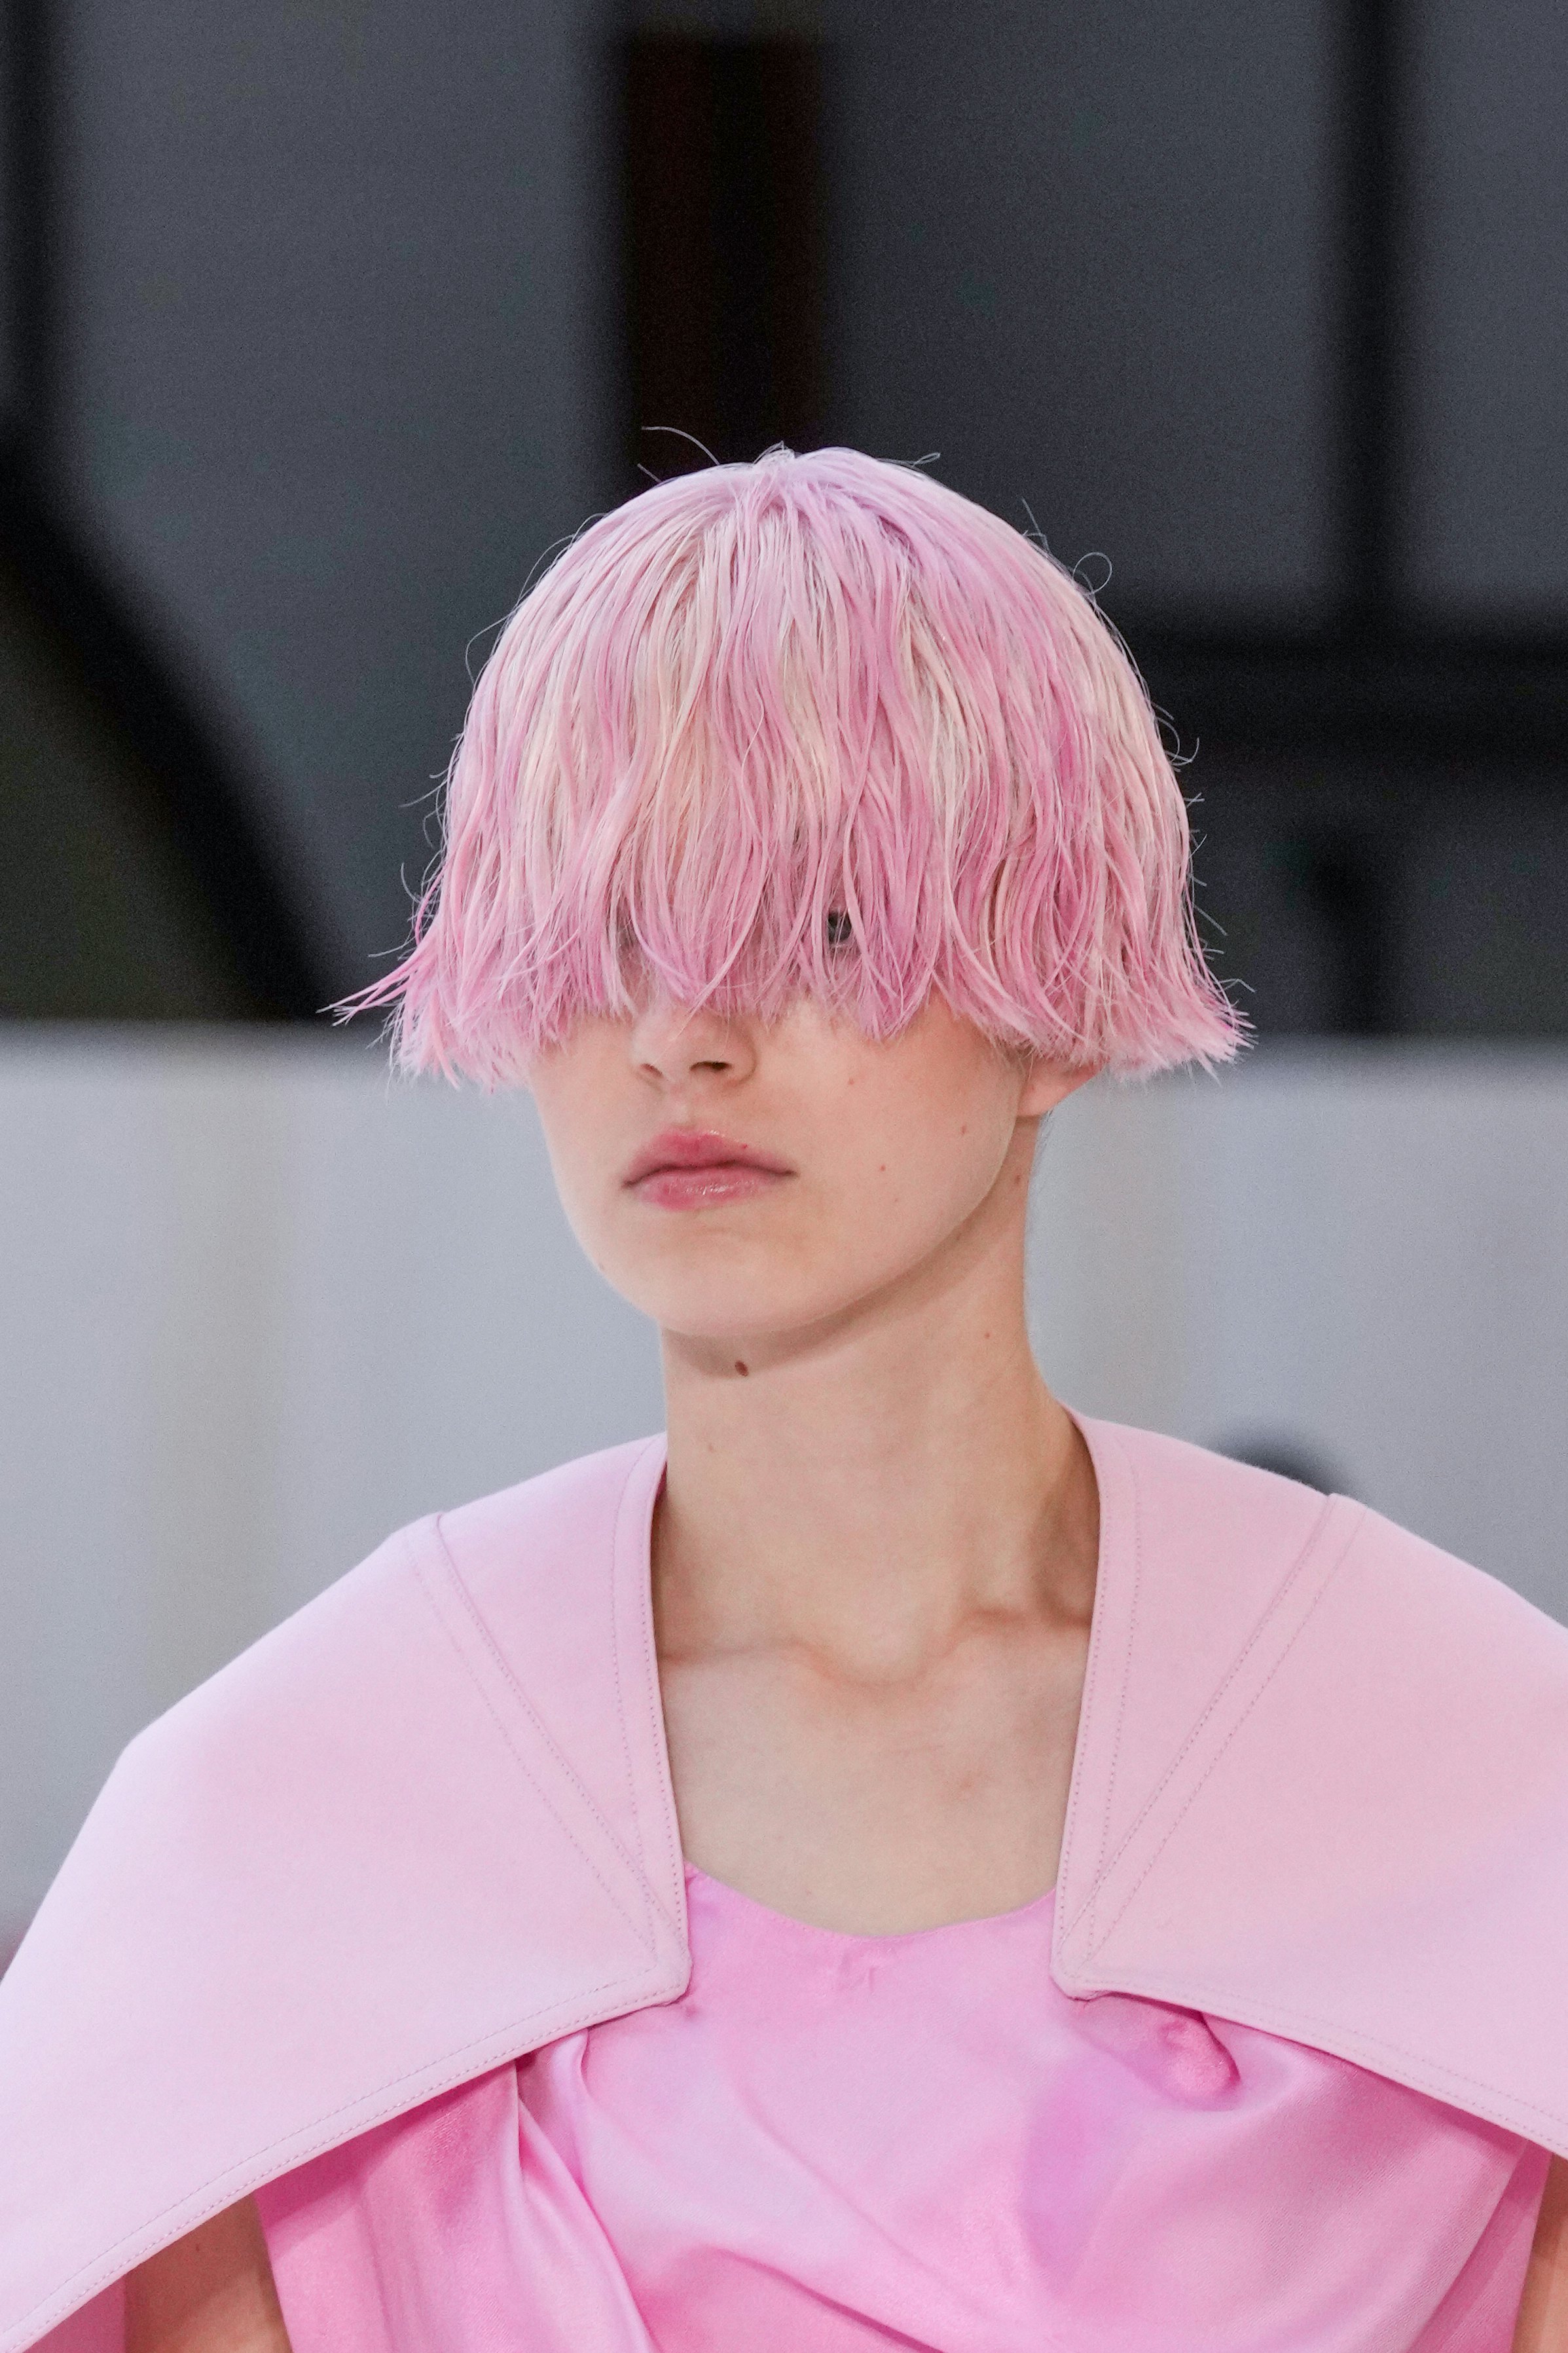 What You Need To Know About The Color Blocking Hairstyle Trend